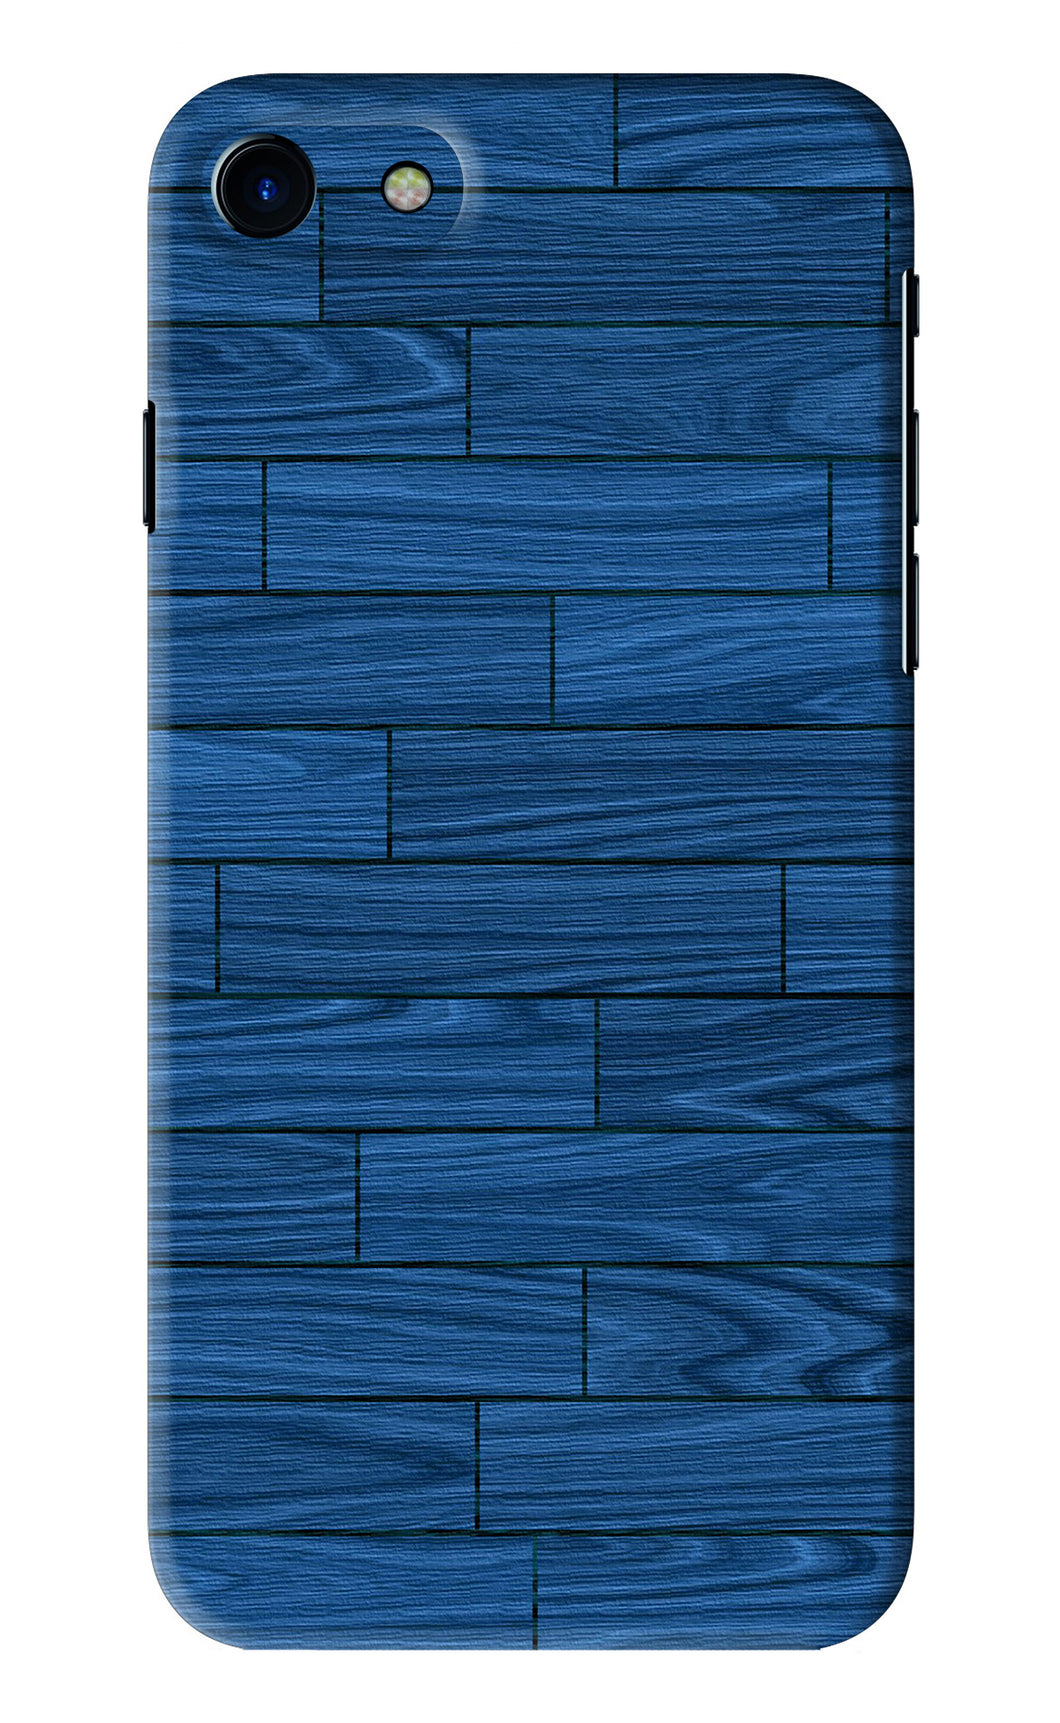 Blue Wooden Texture iPhone 7 Back Skin Wrap